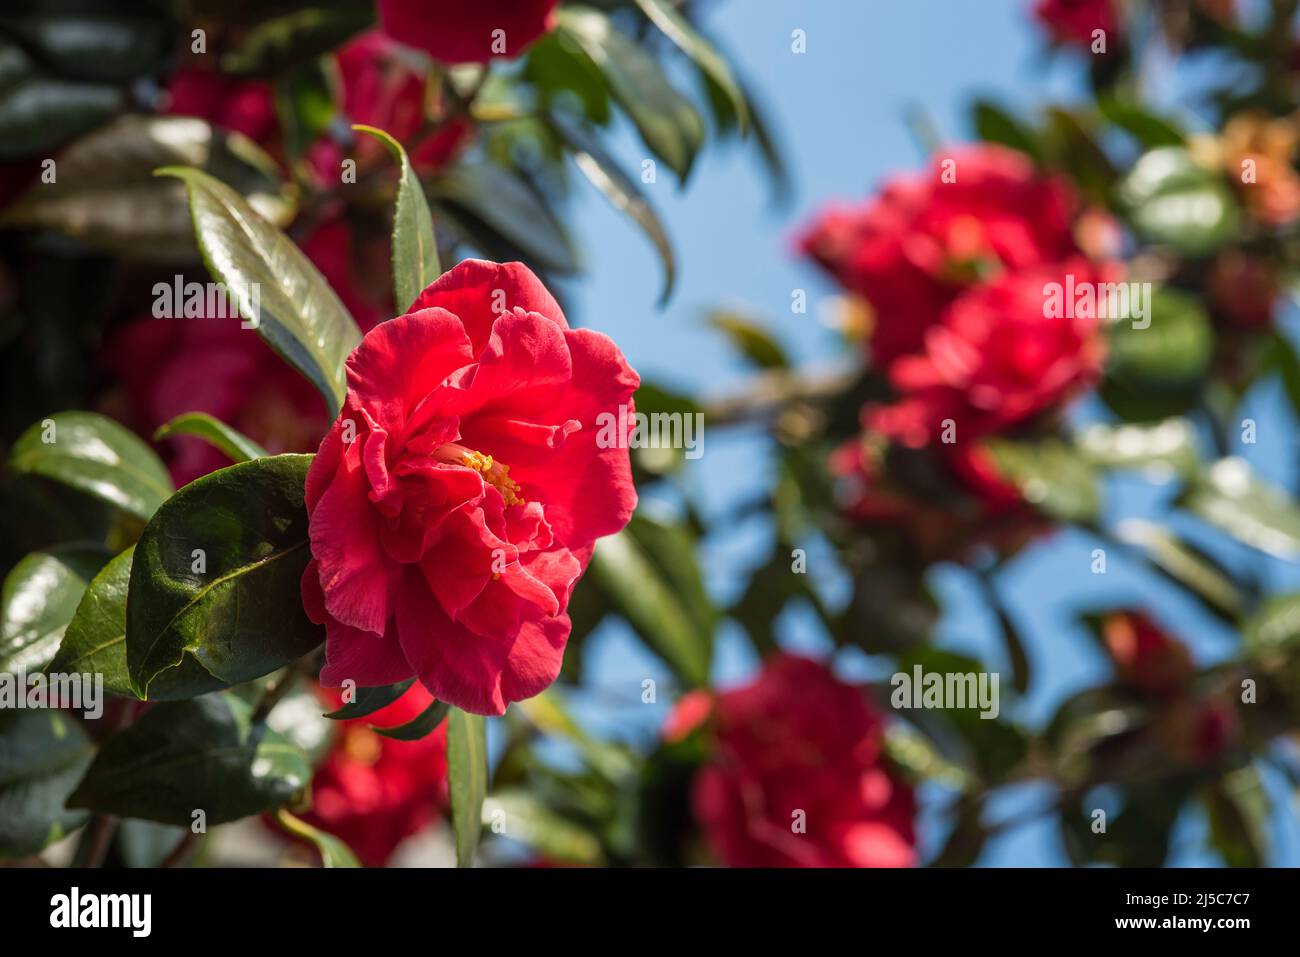 Red Camellia. There are over 2000 cultivars of the Camelia Japonica, C. reticulata has over 400, C. sasanqua over 300. Rose of Winter. Stock Photo